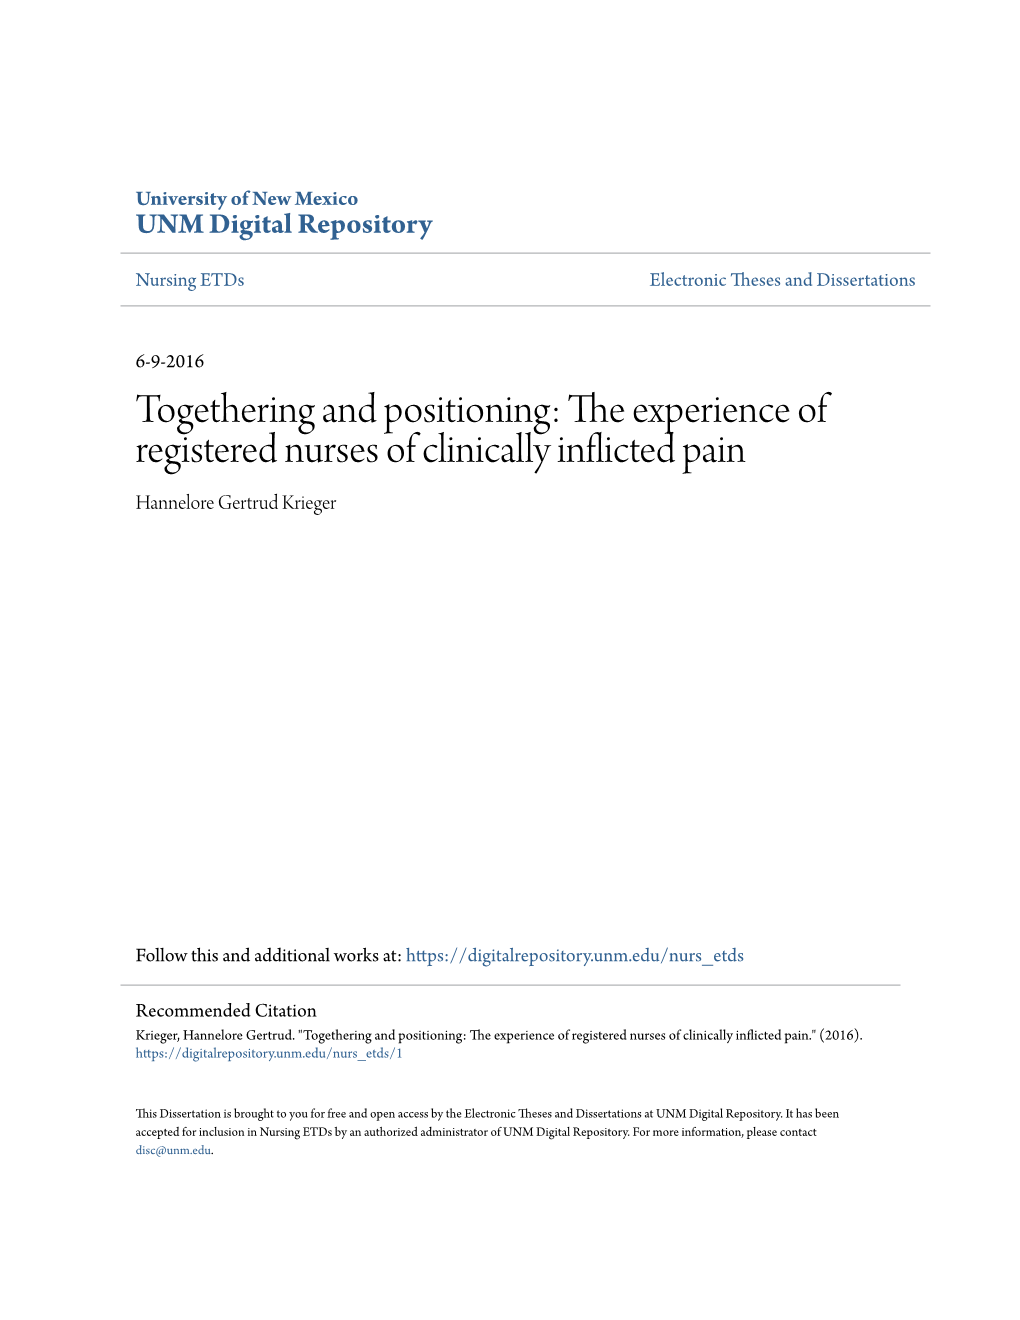 Togethering and Positioning: the Experience of Registered Nurses of Clinically Inflicted Pain Hannelore Gertrud Krieger